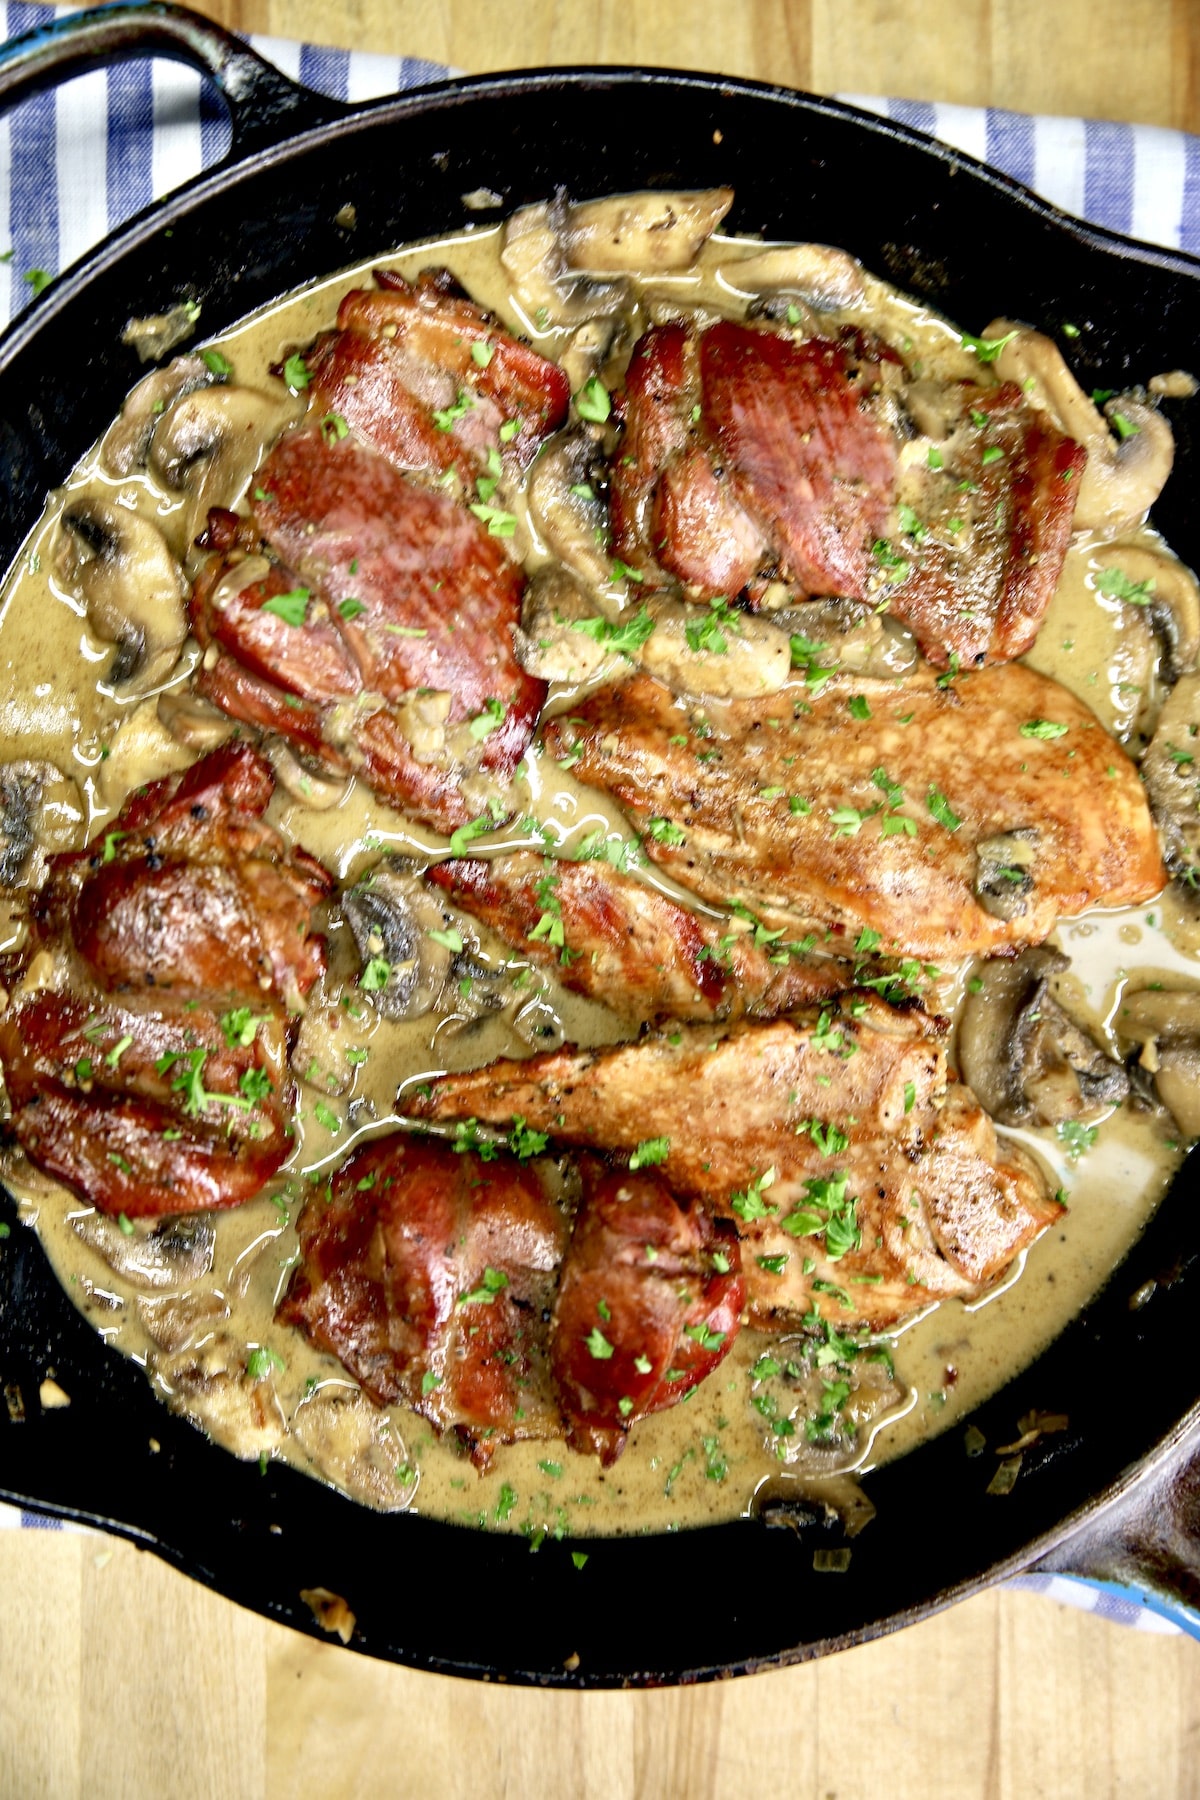 Skillet of chicken with creamy mushrooms sauce.